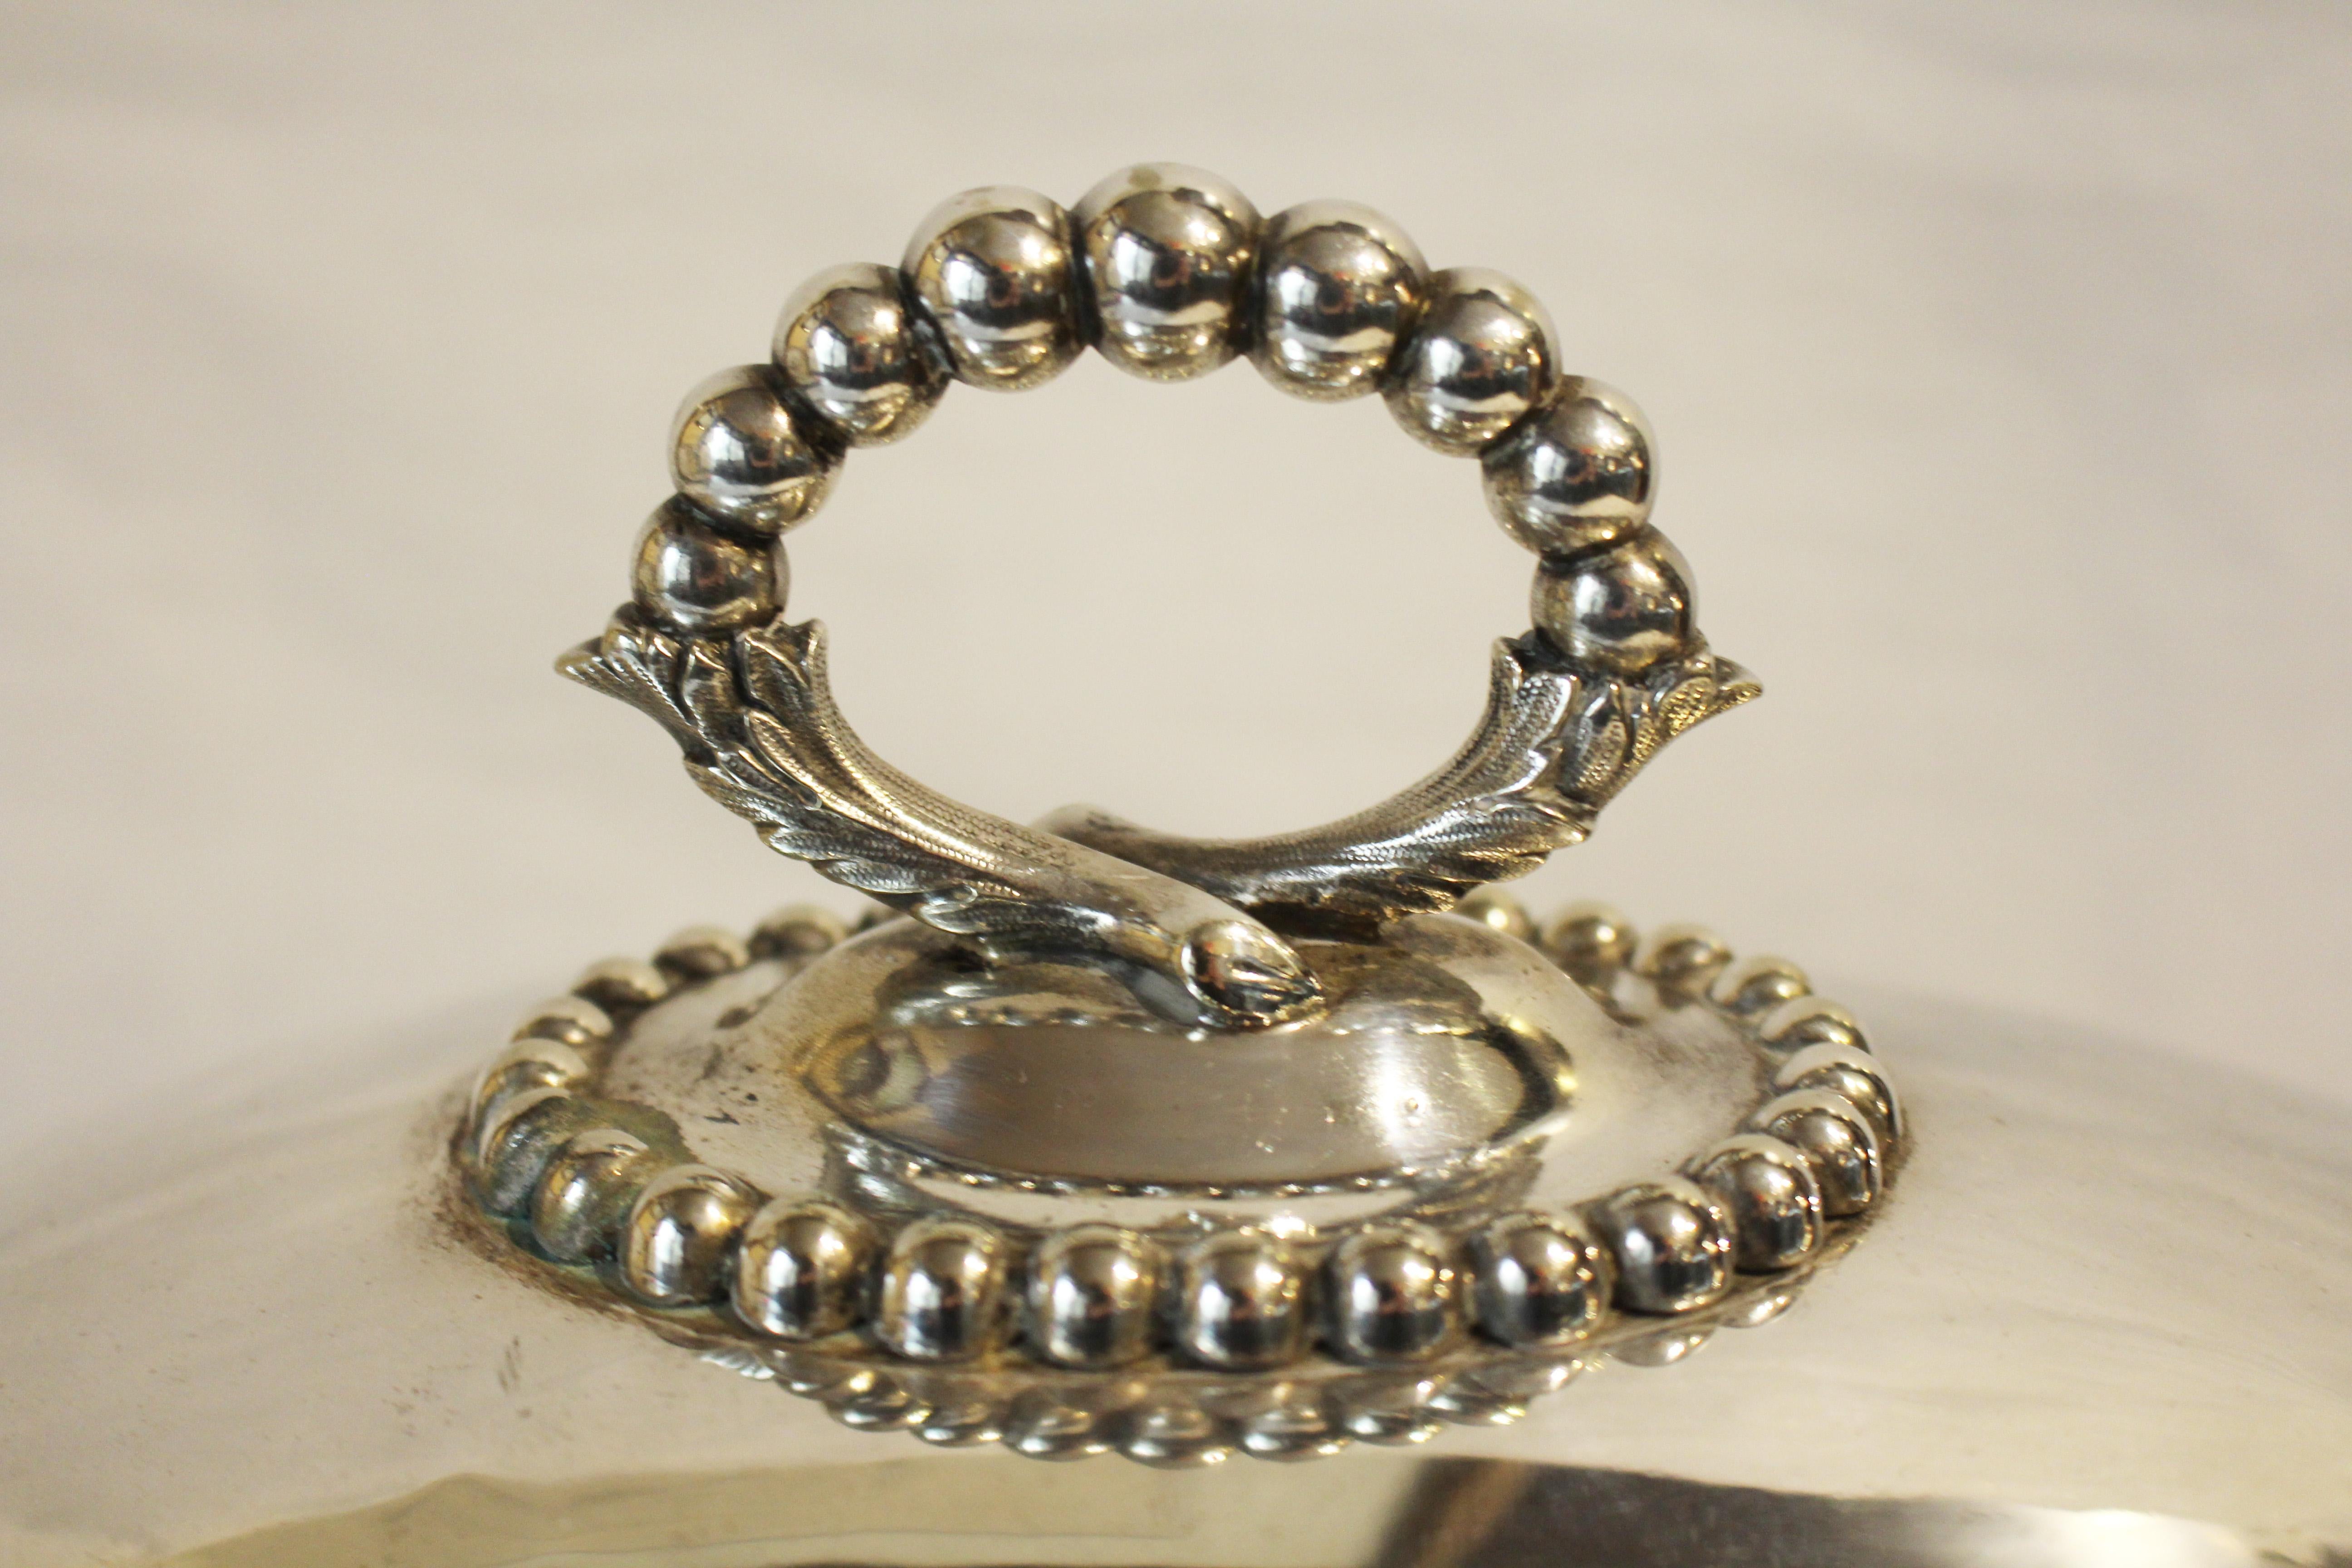 Circa 1850s James Dixon & Sons silver plated meat dome with bold beaded border. Raised by hand. Fully hallmarked. Minor blemishes reveal nickle silver base metal.
Measures: 14